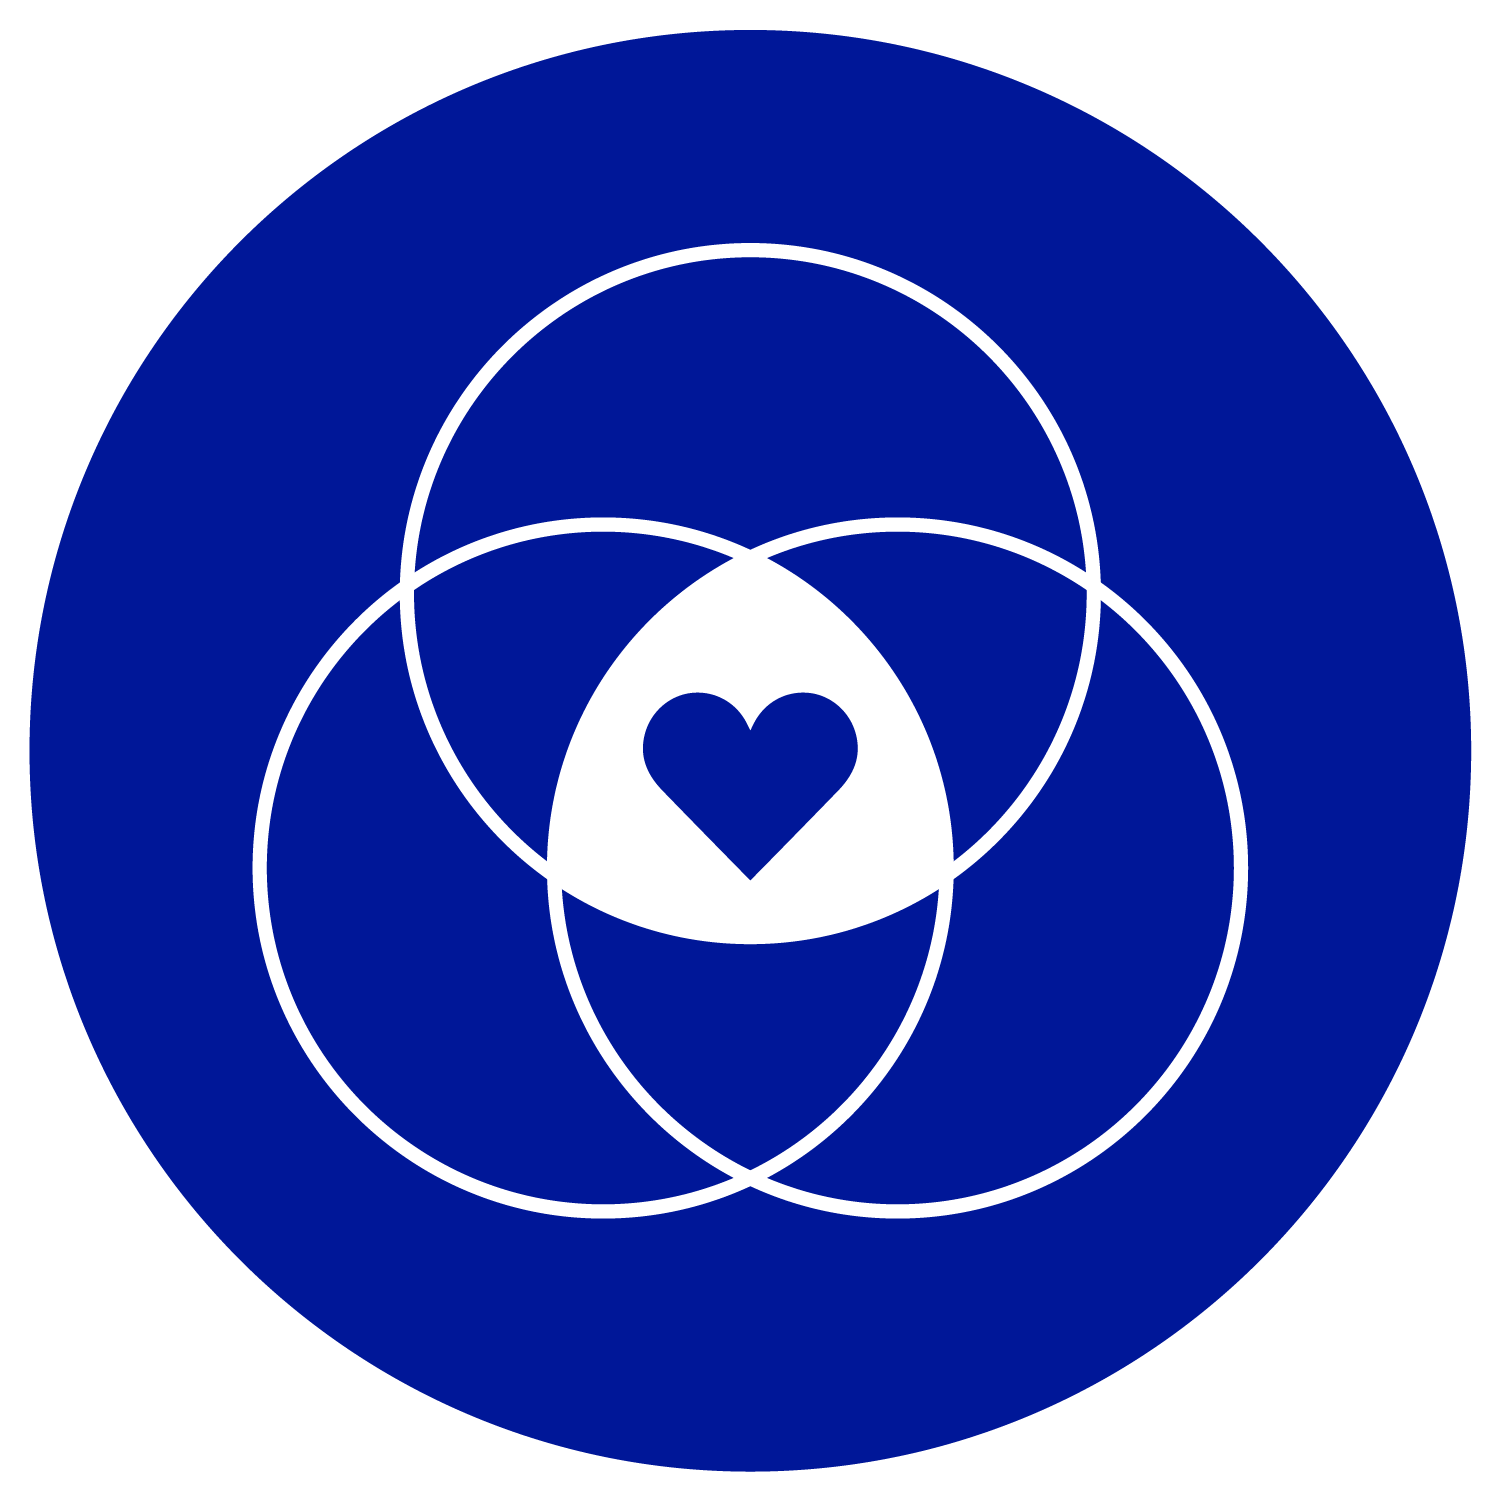 icon of 3 circles overlapping on another and a heart in the middle